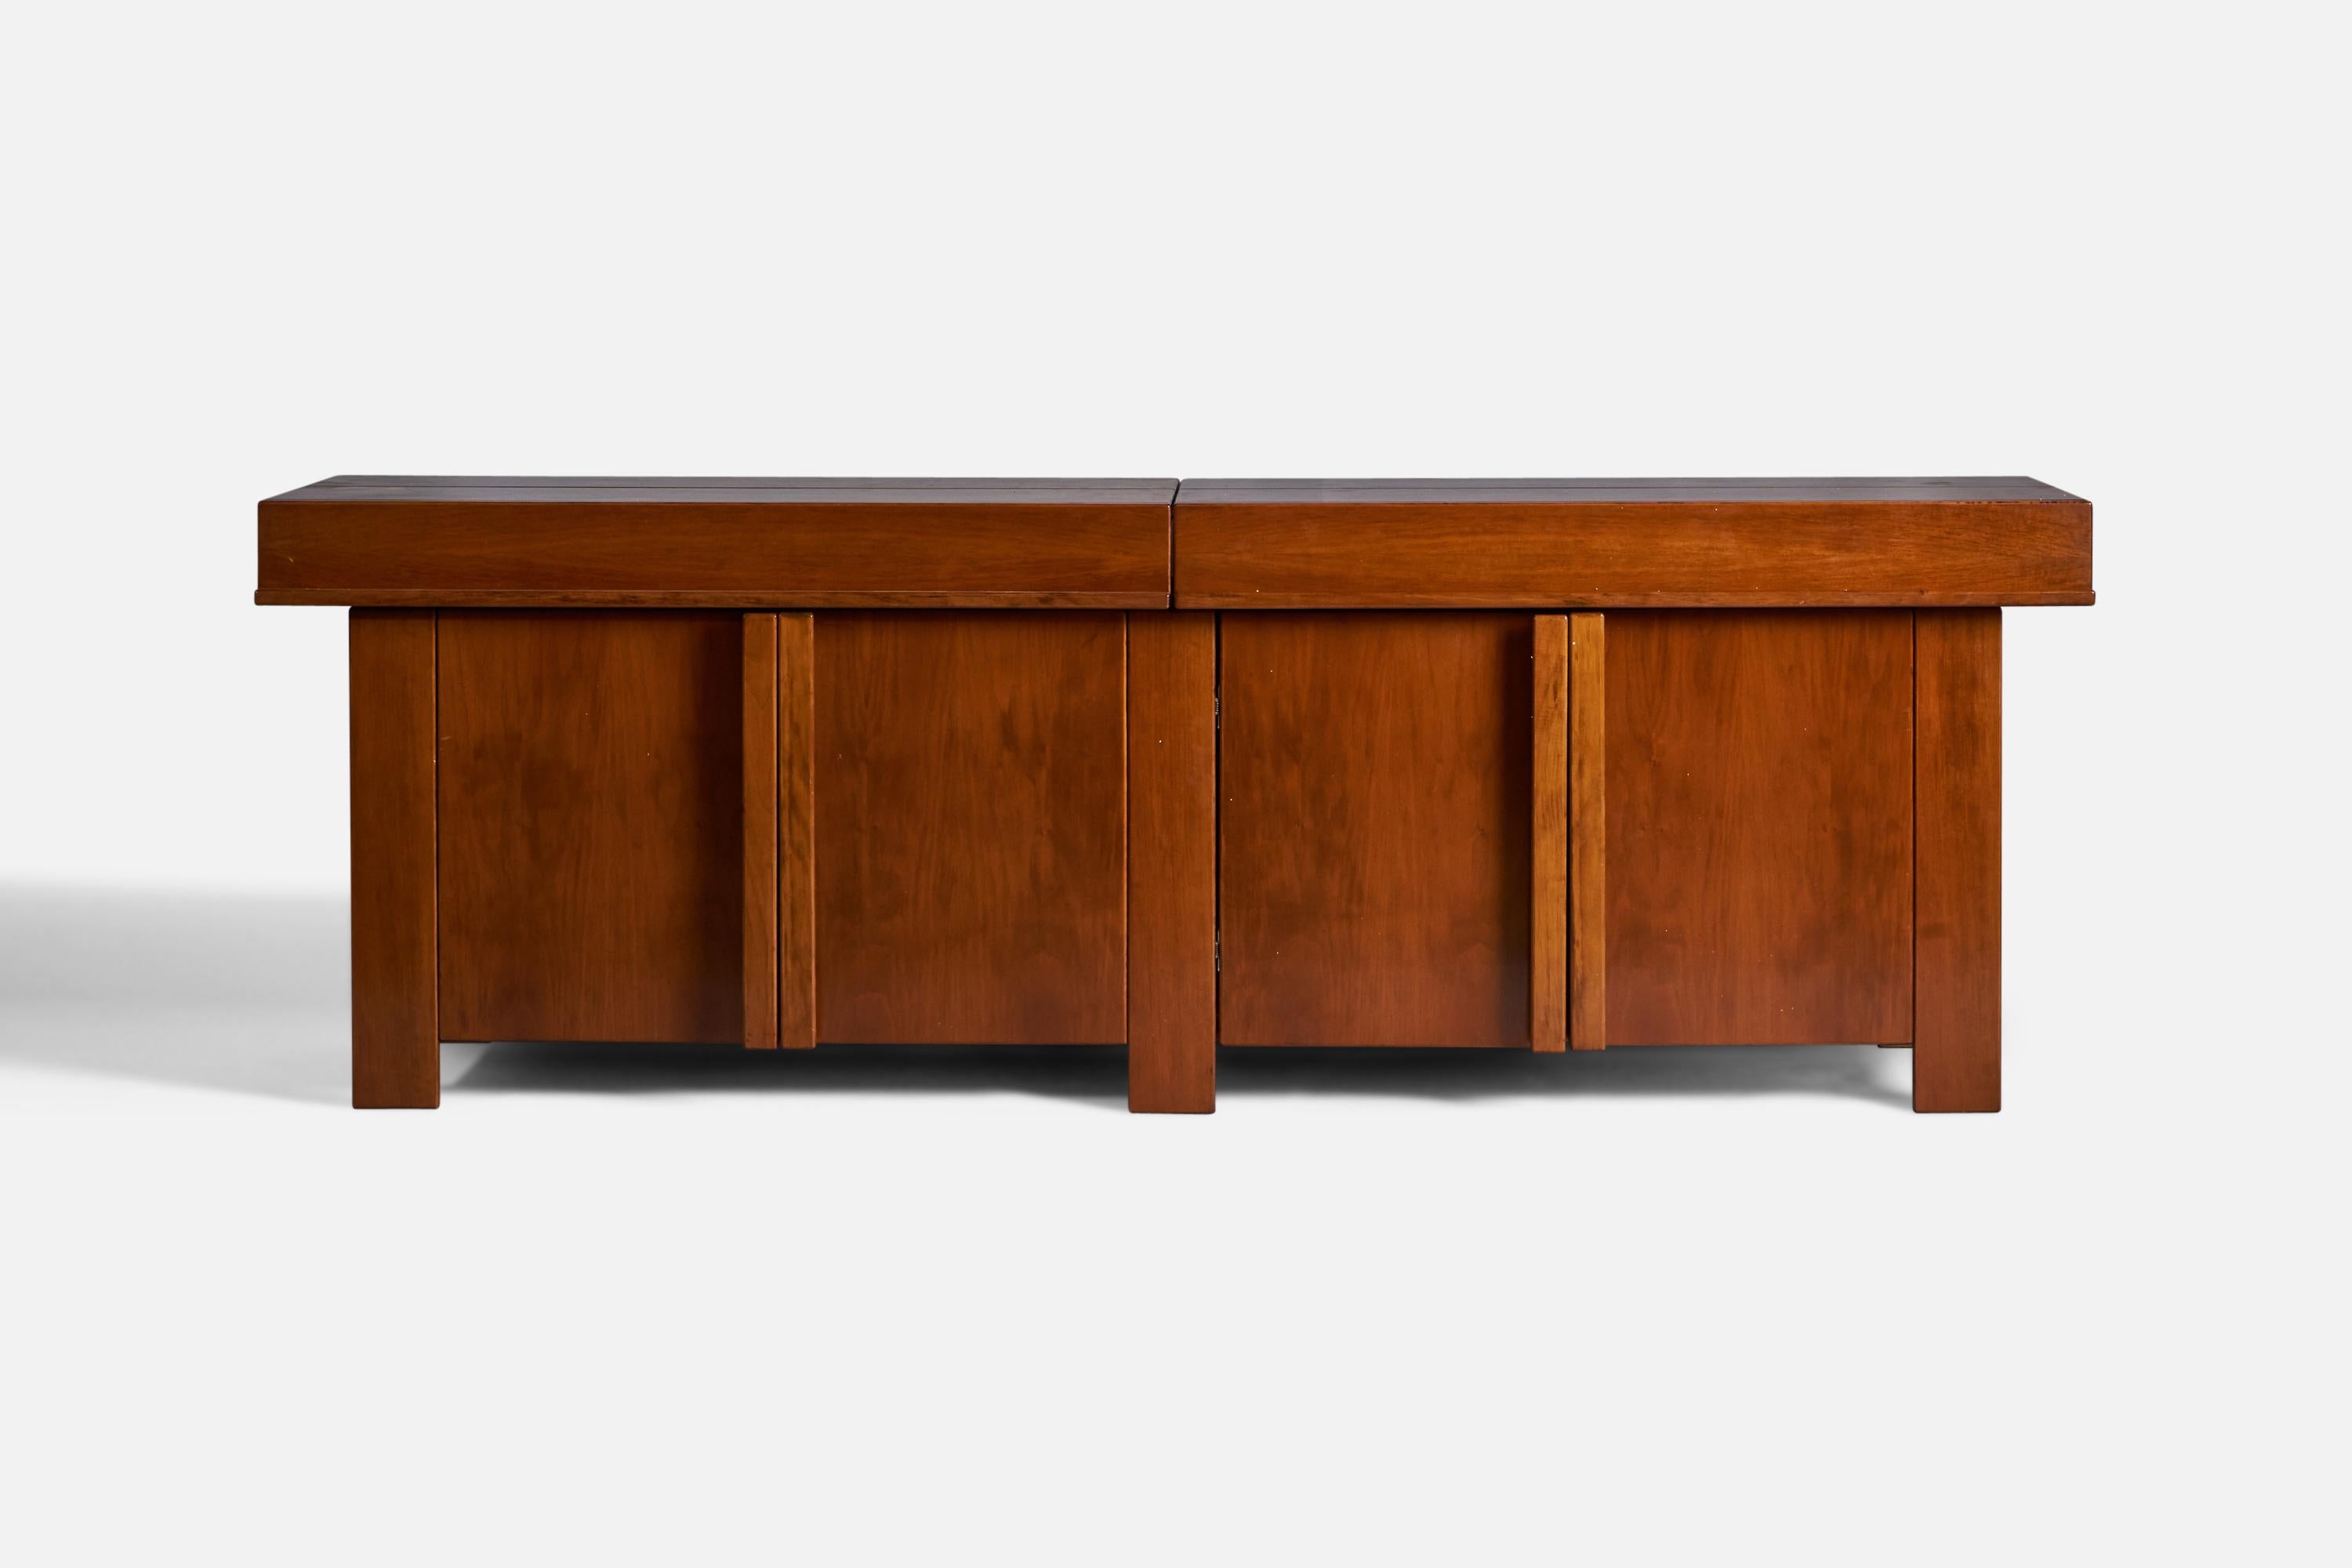 A sizeable walnut cabinet or sideboard, designed by Silvio Coppola and produced by Bernini, Italy, 1960s.